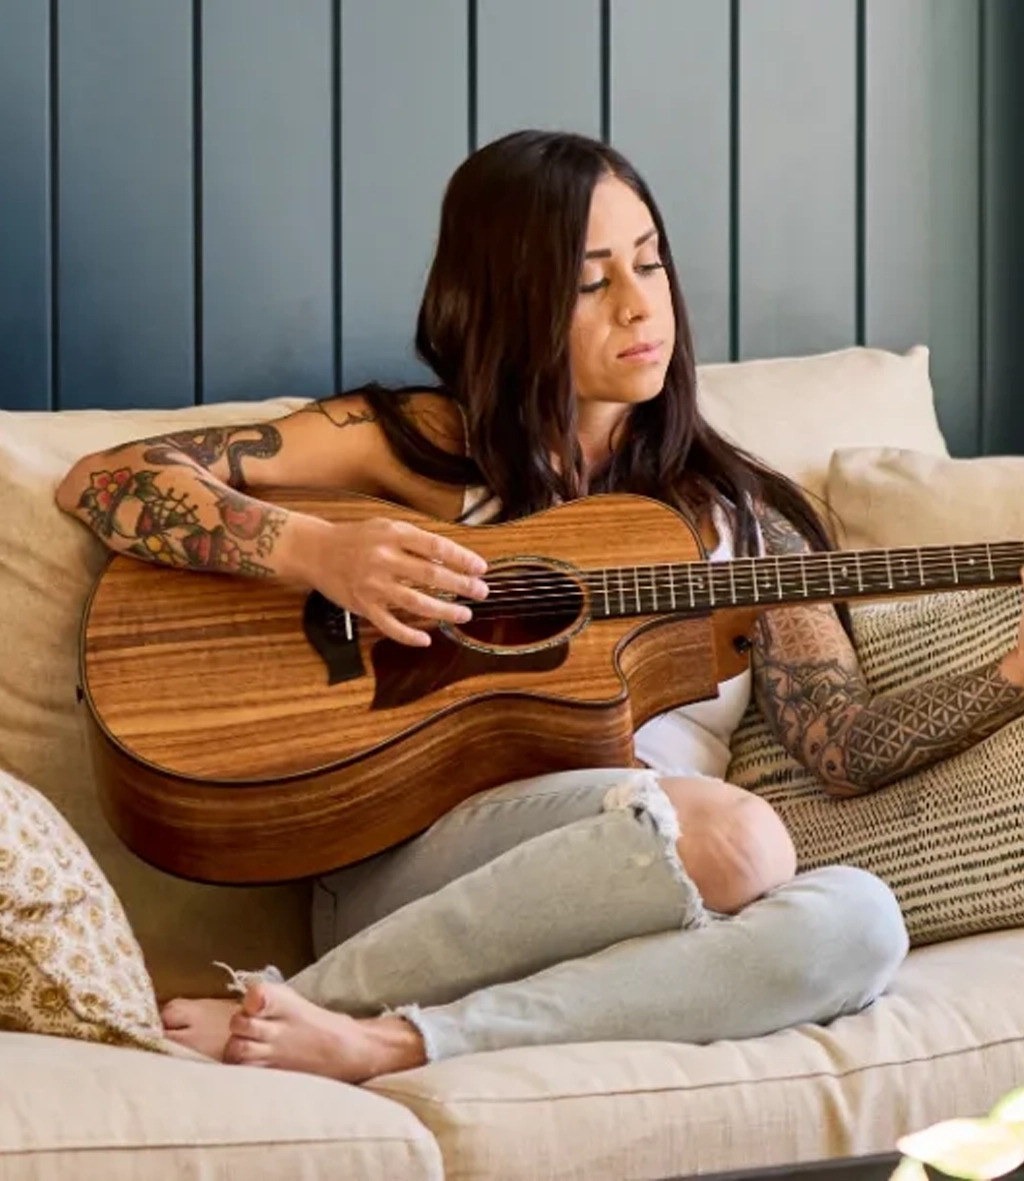 Girl sitting relaxed on couch playing guitar